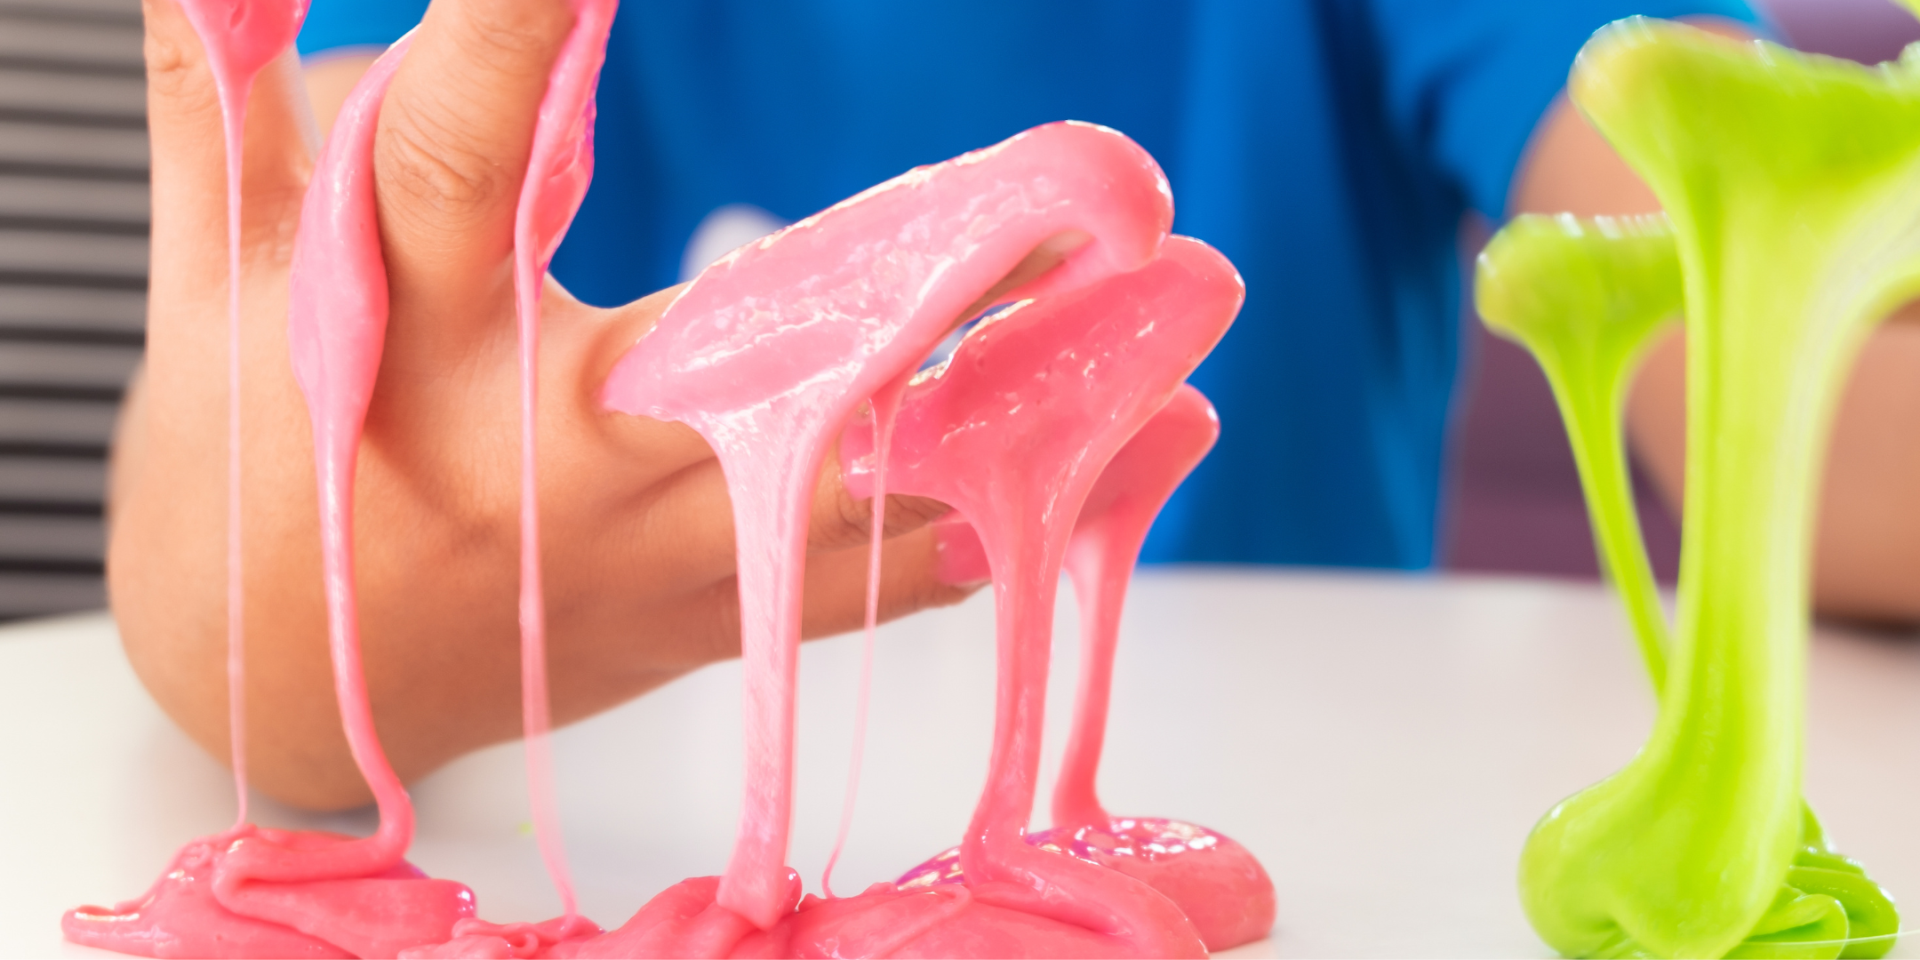 Make your own Slime